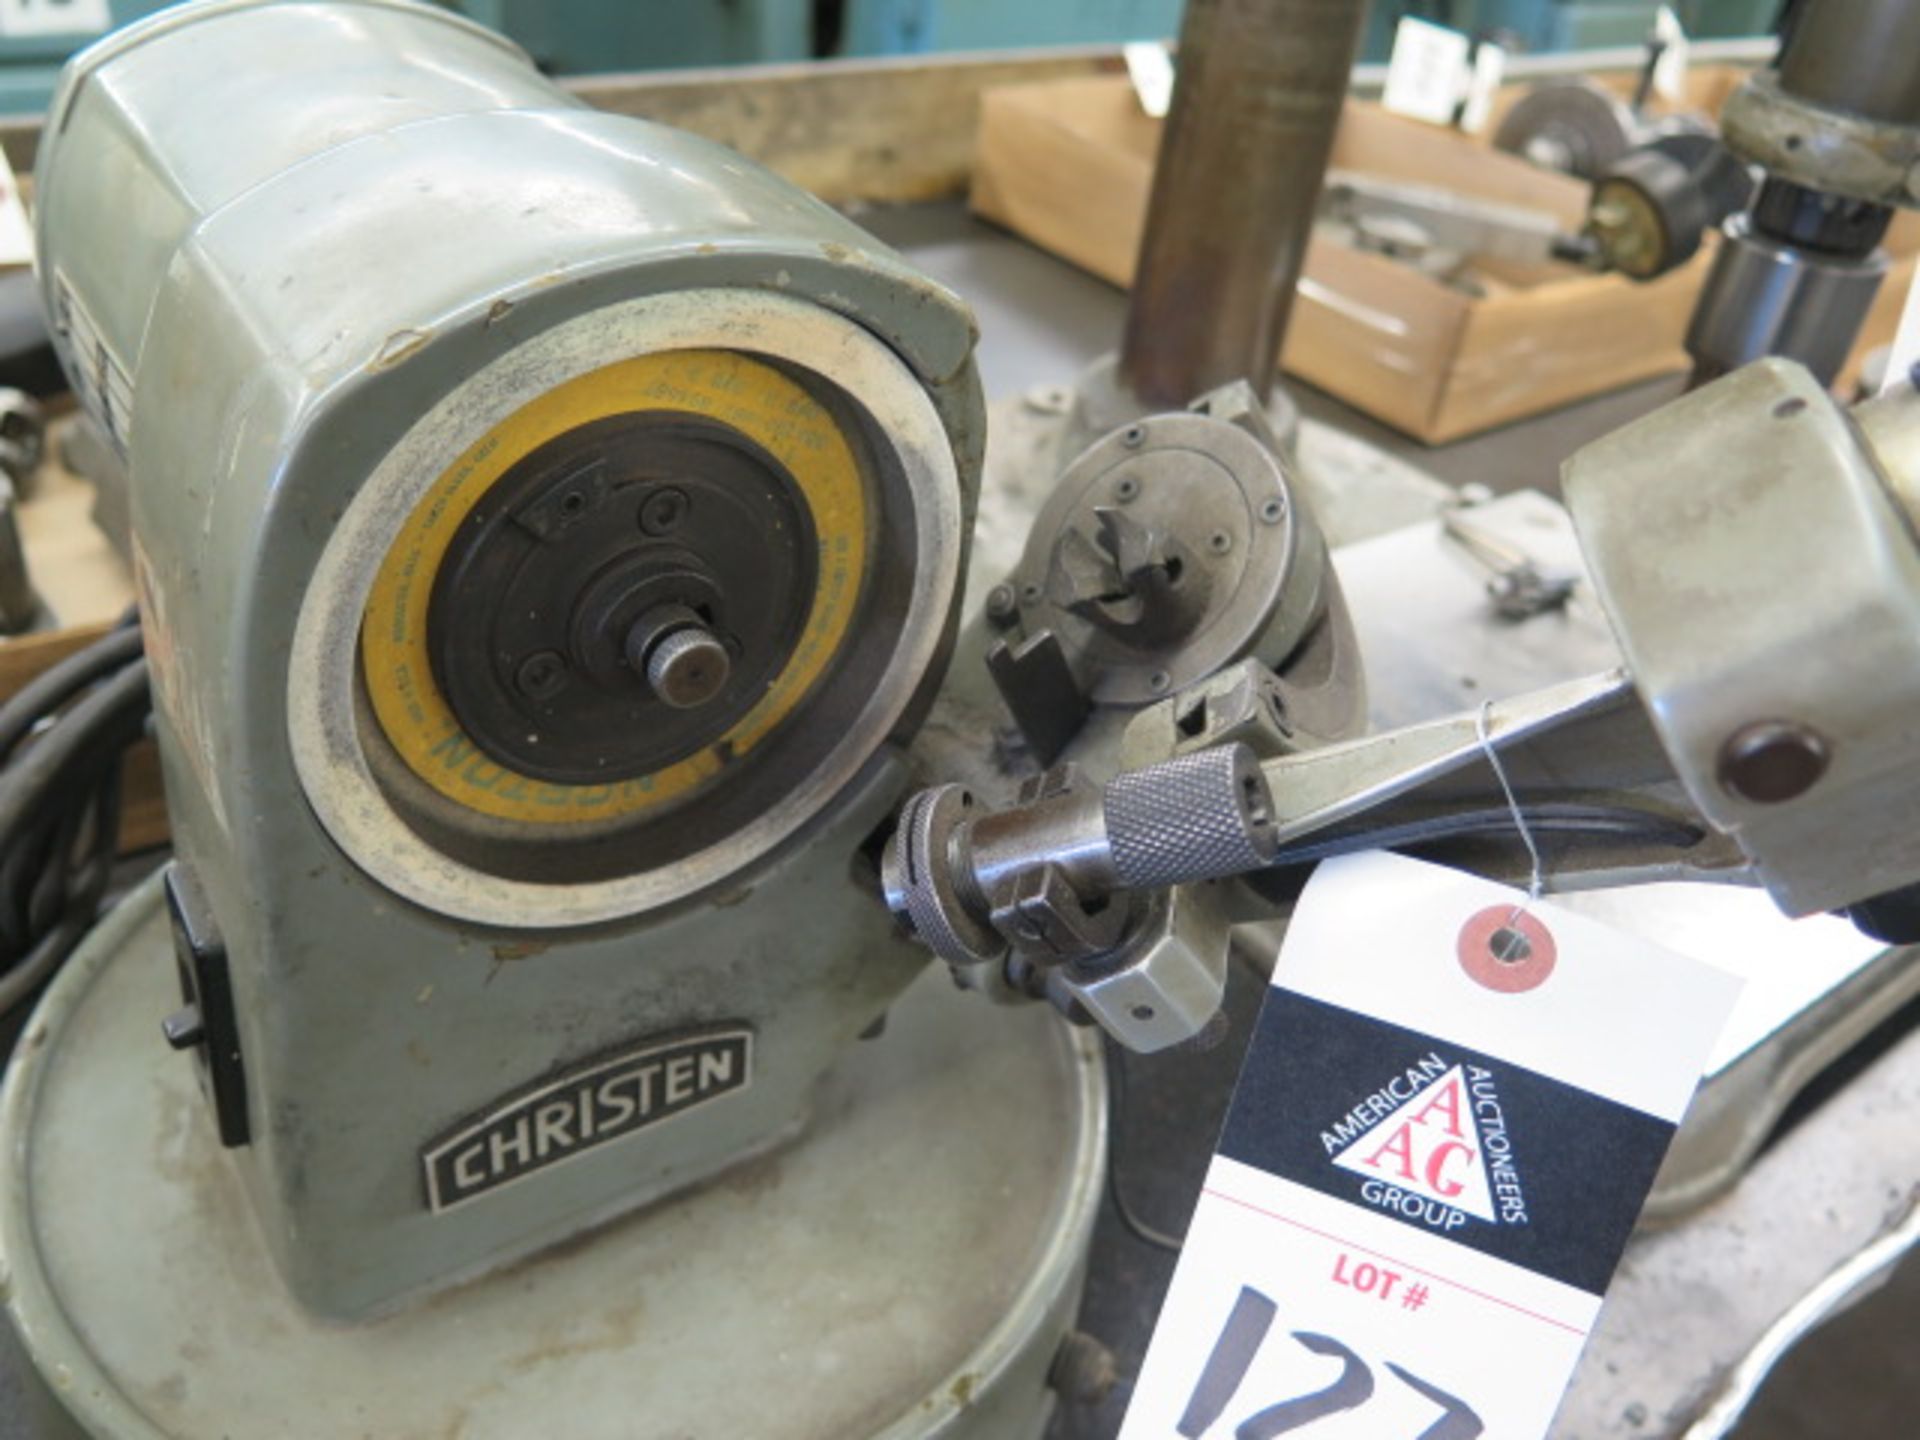 Christen Type LC21CH Precision Small Drill Sharpener s/n 340830 - Image 2 of 3